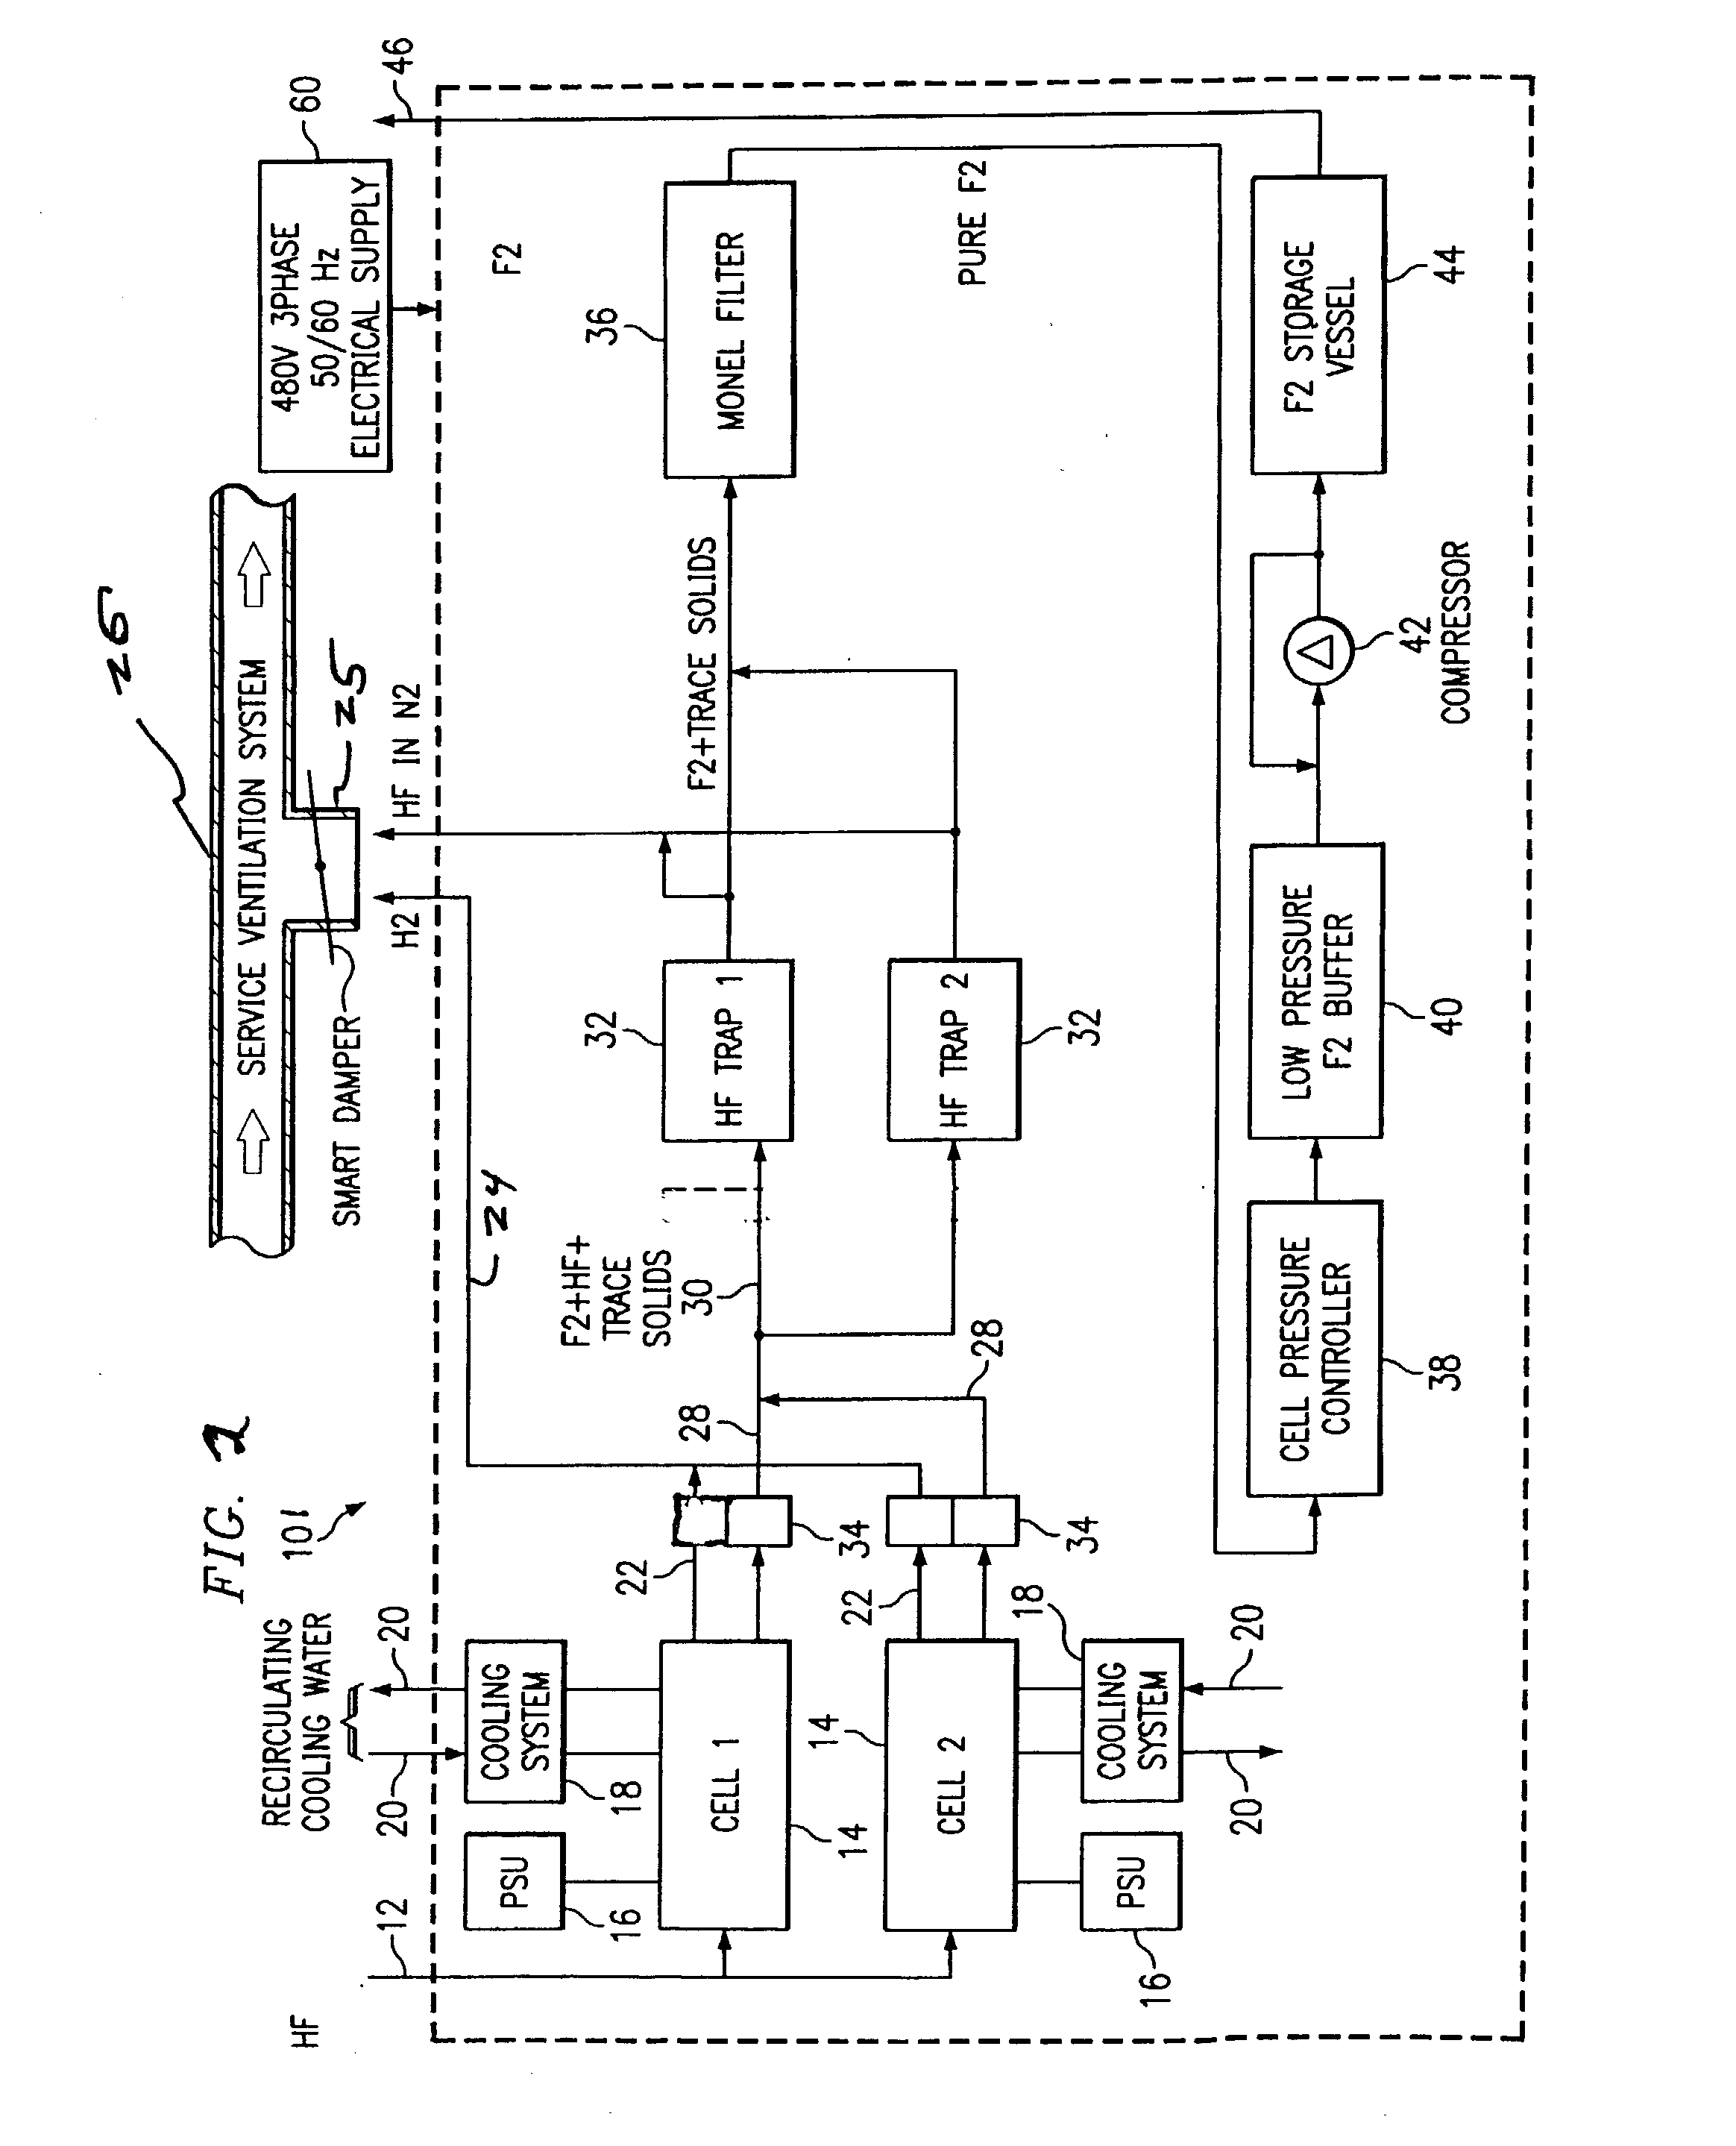 Generation and distribution of molecular fluorine within a fabrication facility